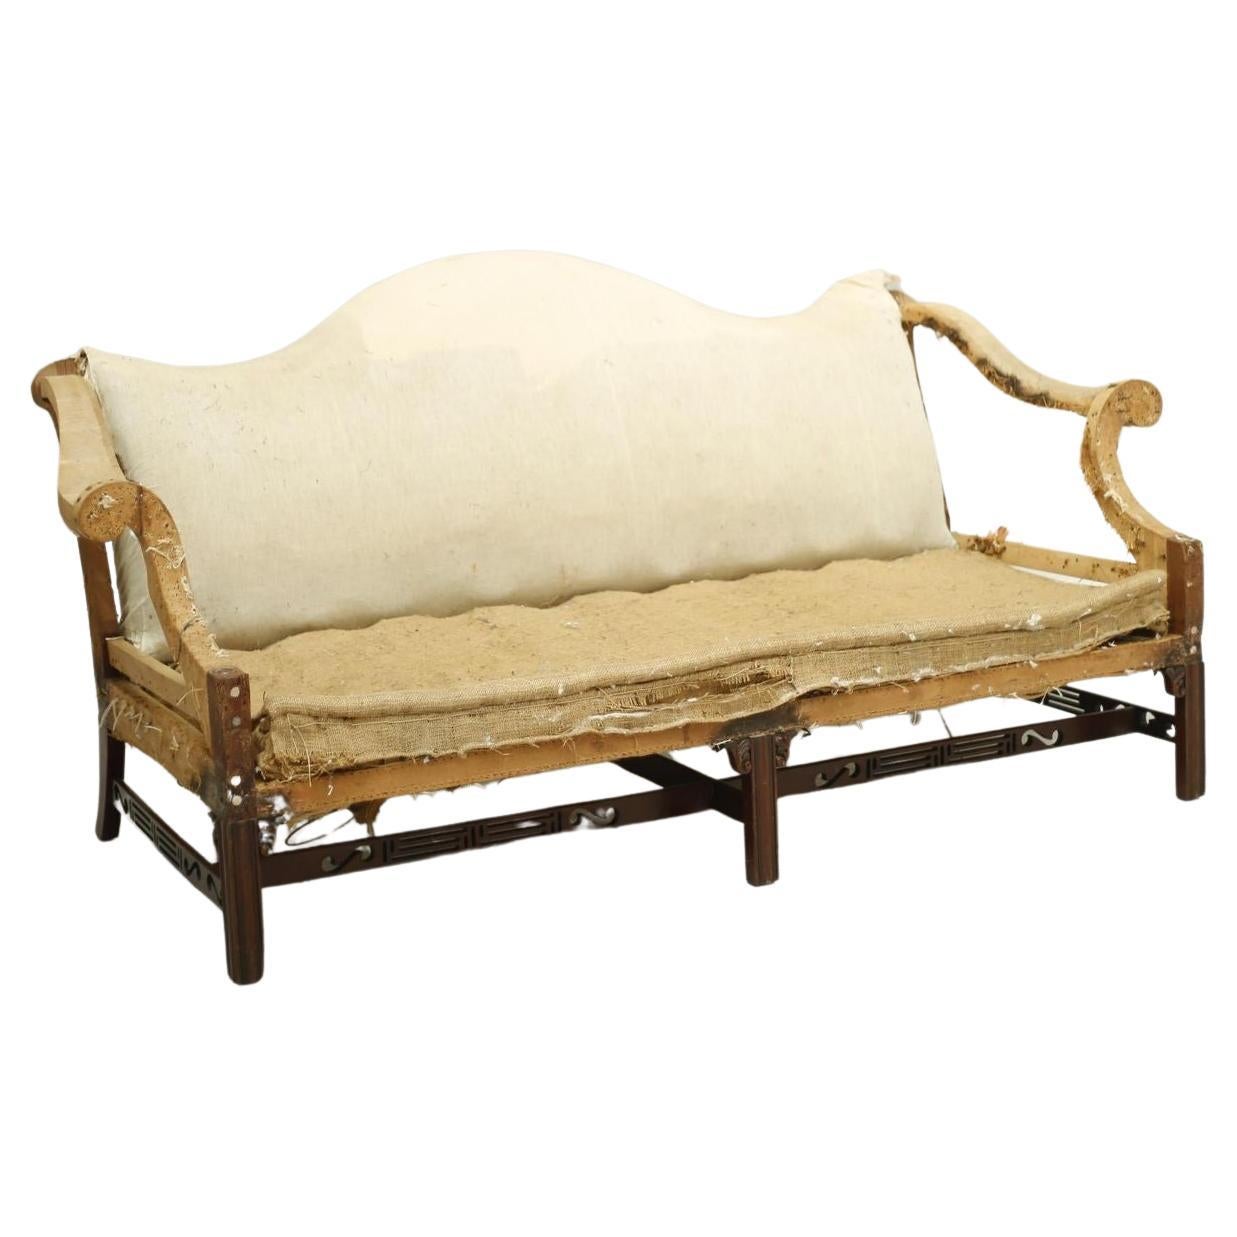 American c.1930's Camel Backed Sofa with Fret Work Stretcher